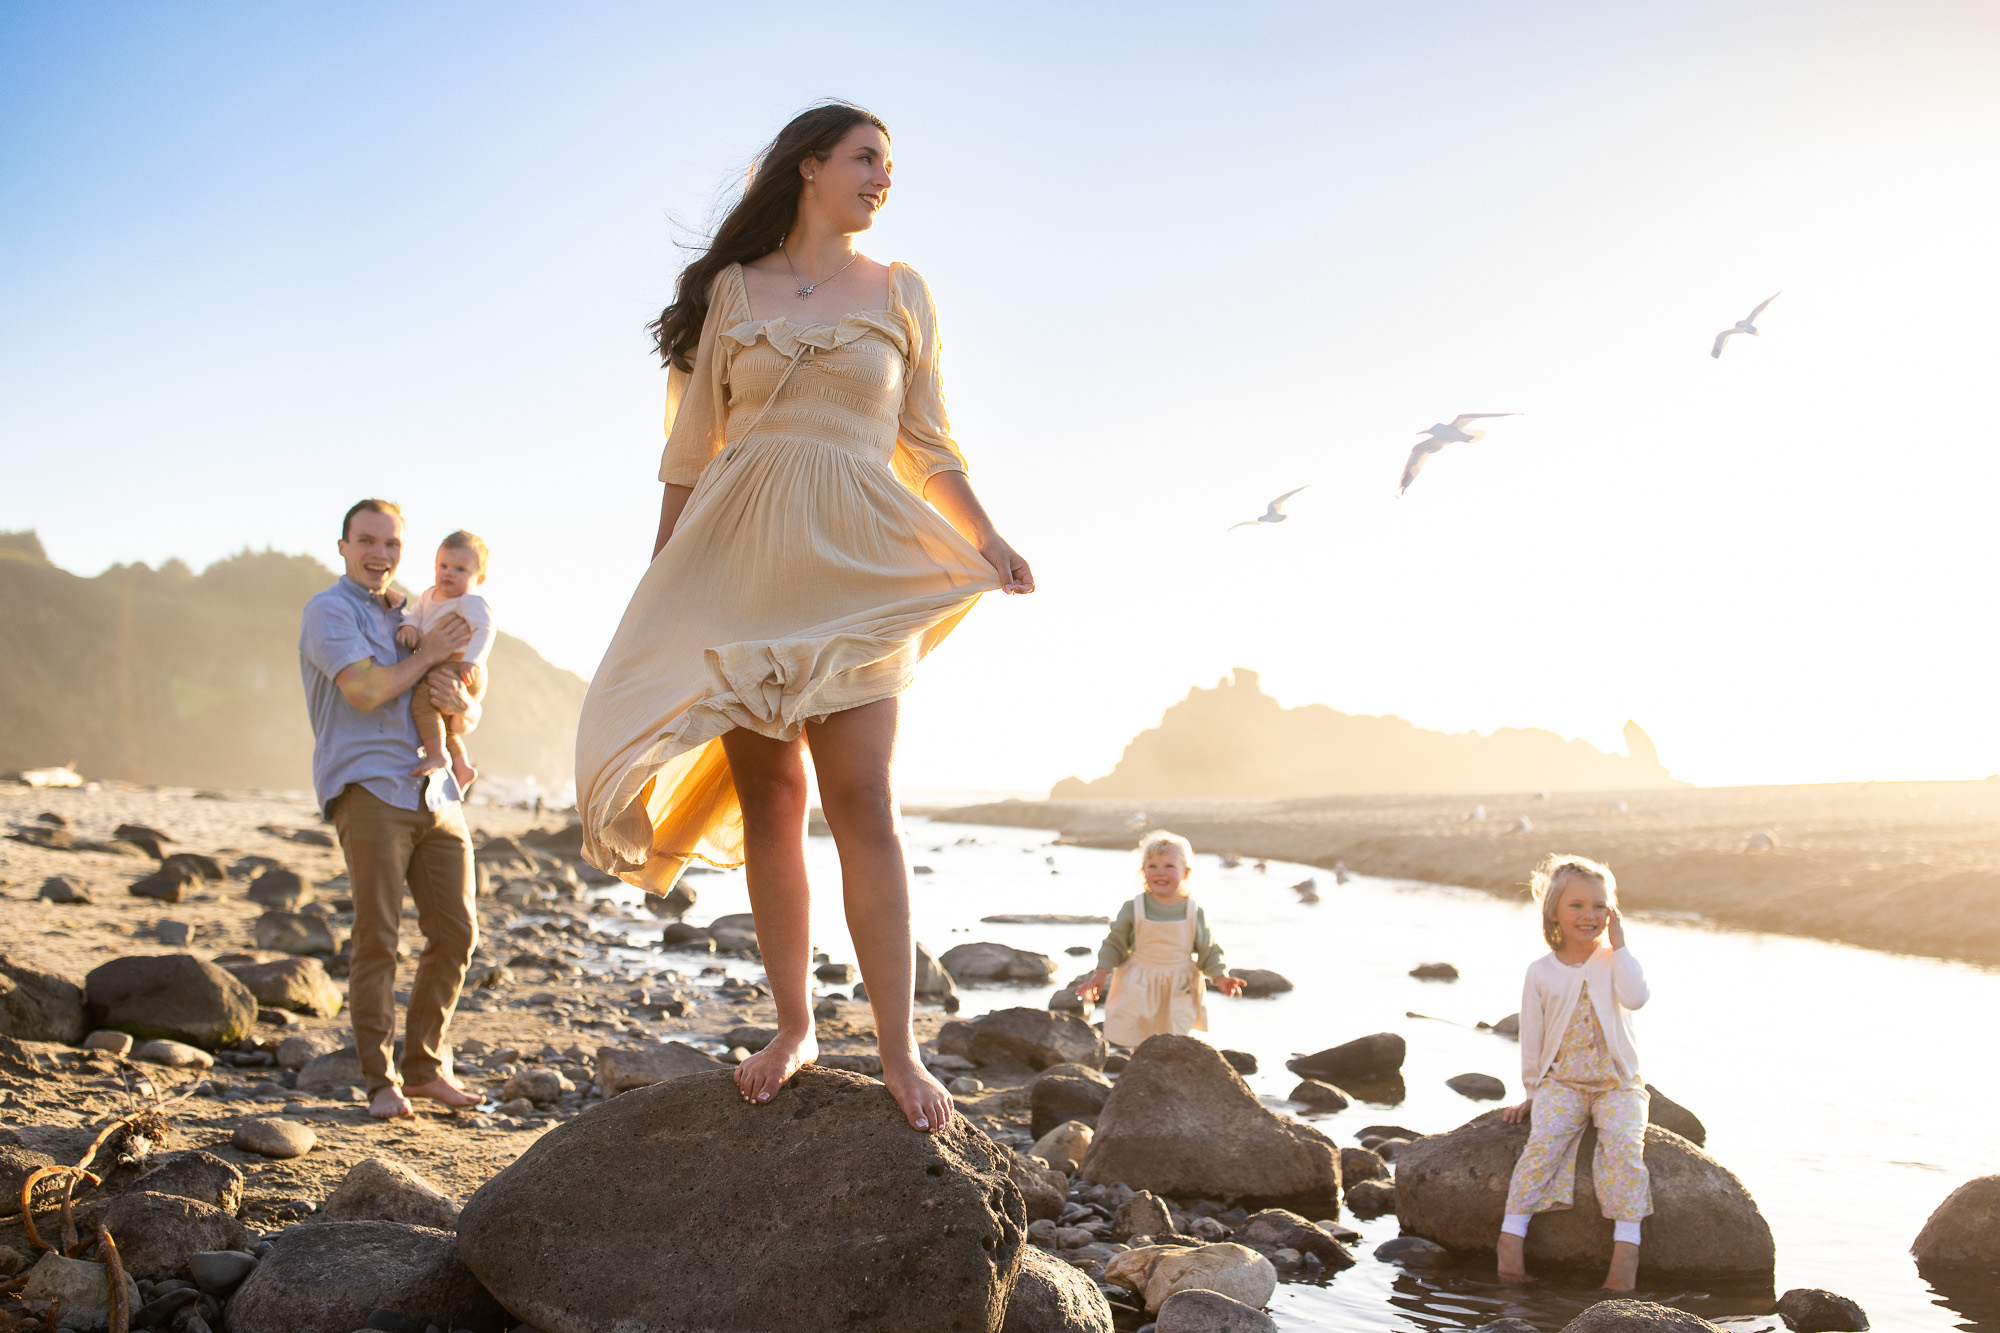 Oregon Coast photographer captures mom standing on rock with family behind her at sunset on the beach.